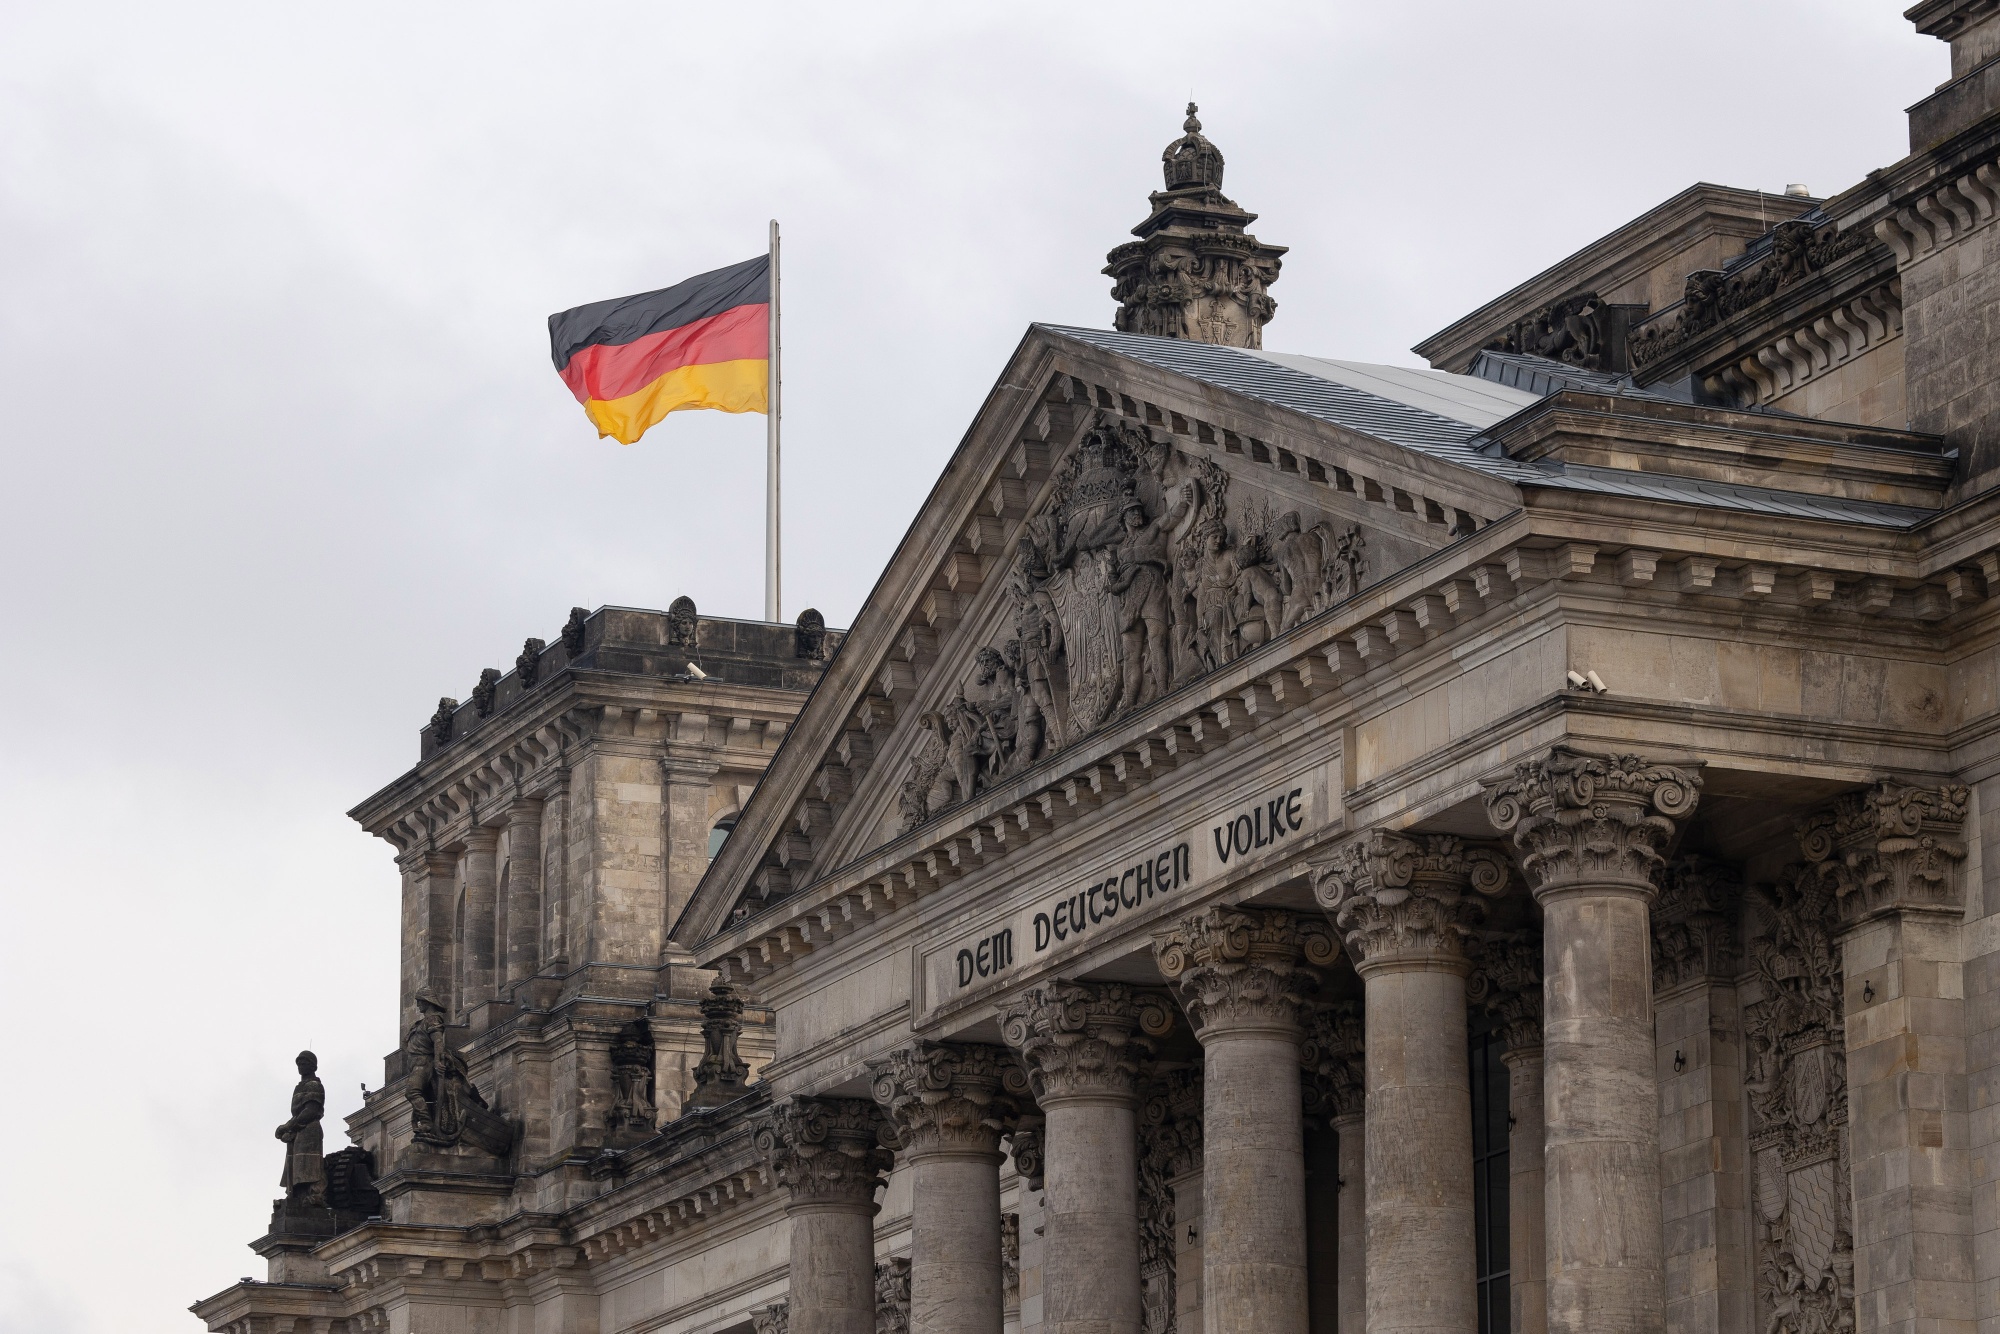 A German national flag flies above the Reichstag building in Berlin.